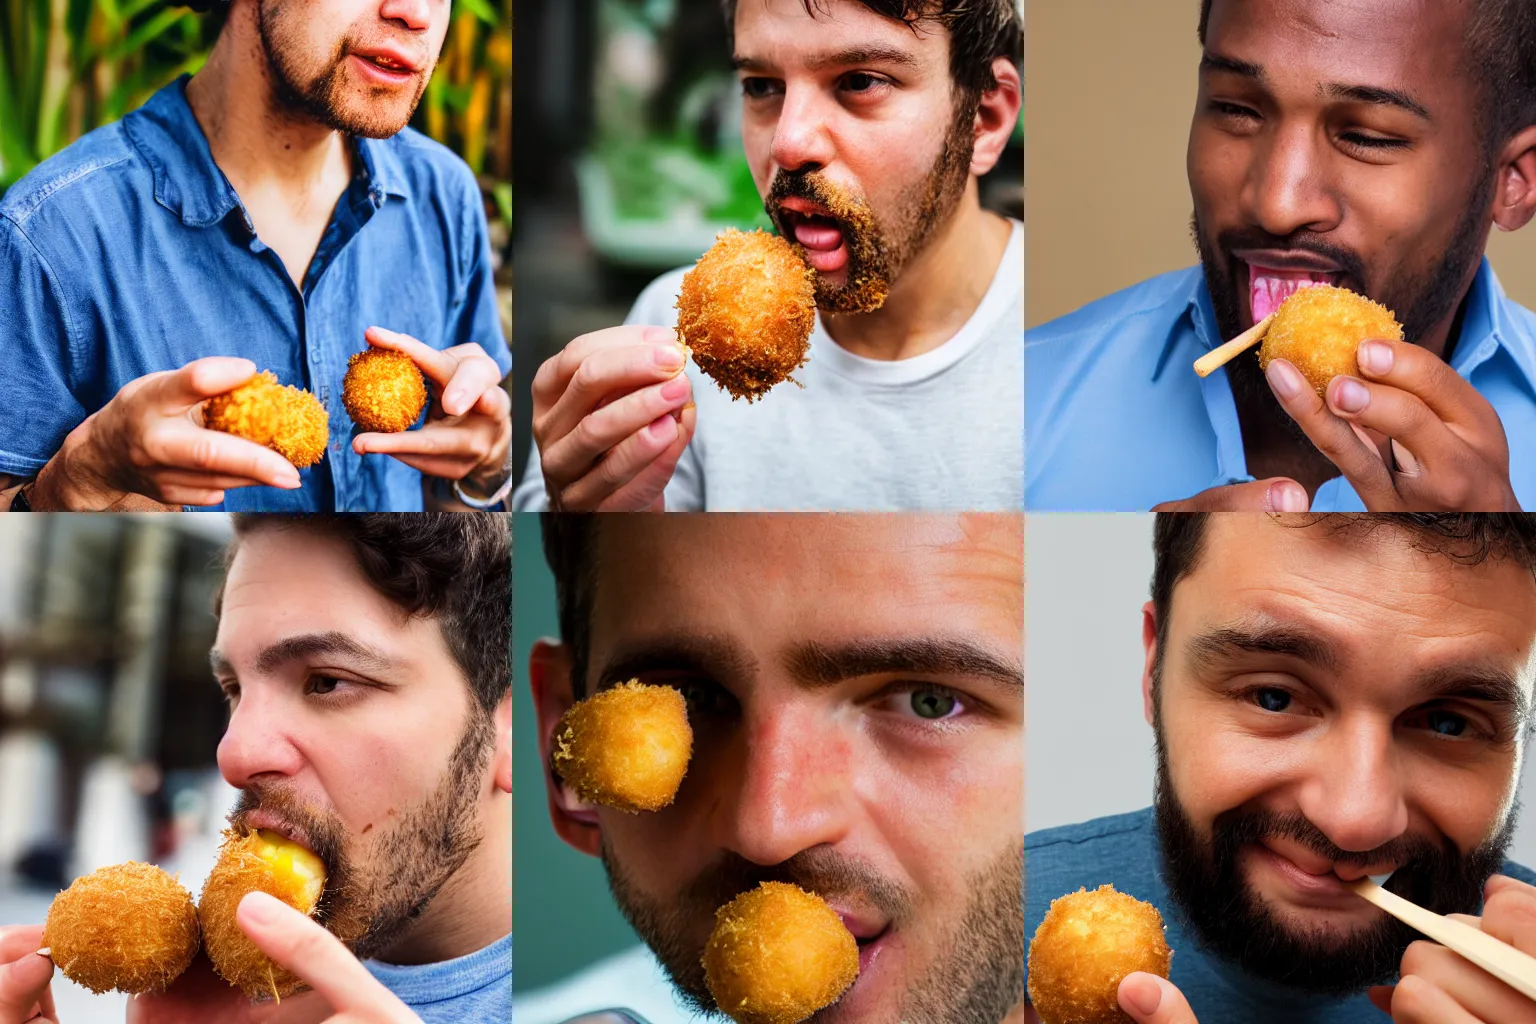 Prompt: closeup headshot photo of the man tasting a croquette, detailed face details